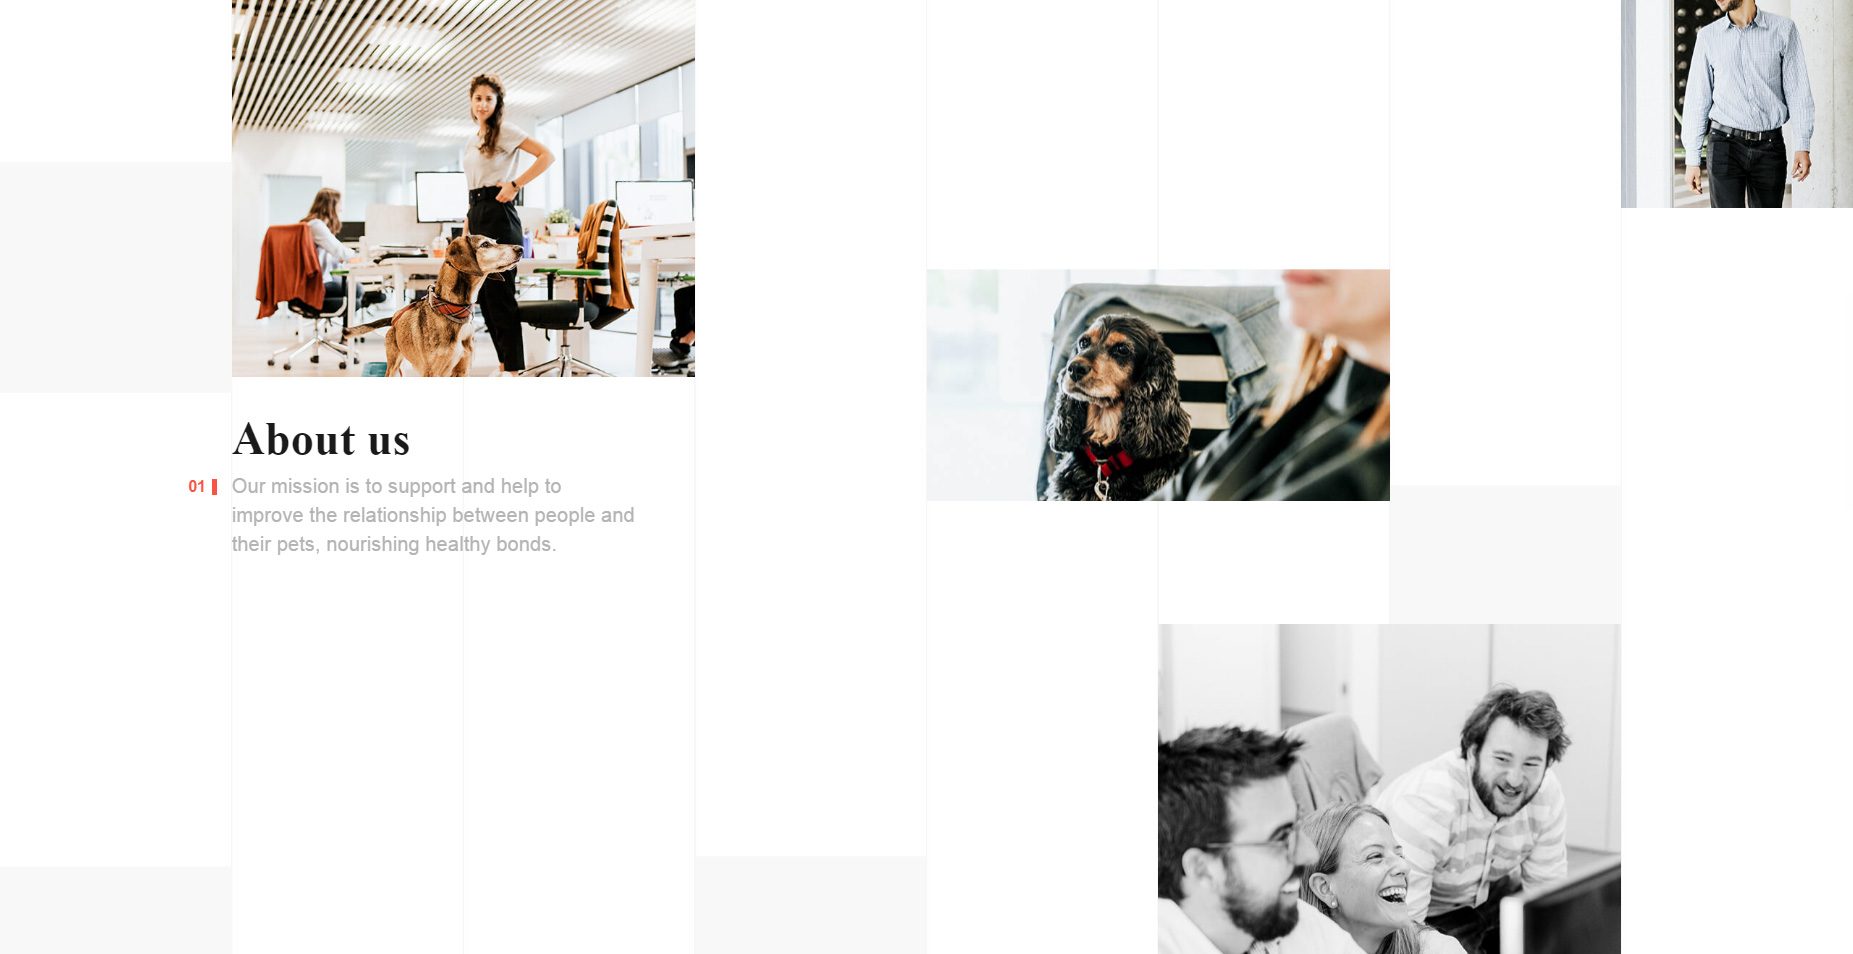 Affinity - Talent Brand - Website of the Day